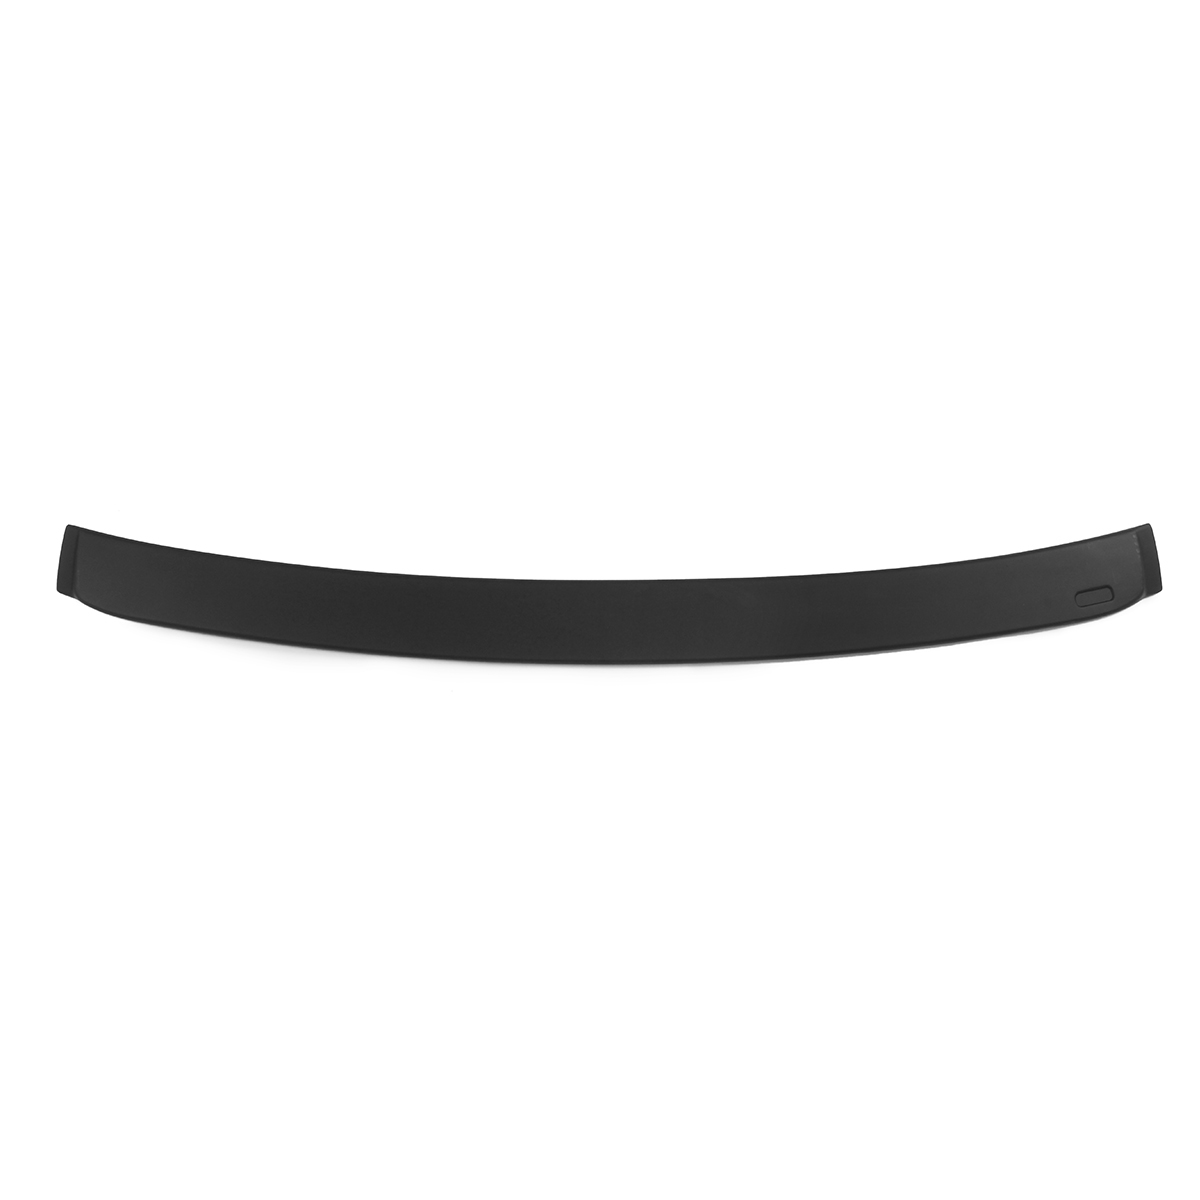 Car ABS Real Plastic Rear Roof Wing Trunk Spoiler Black